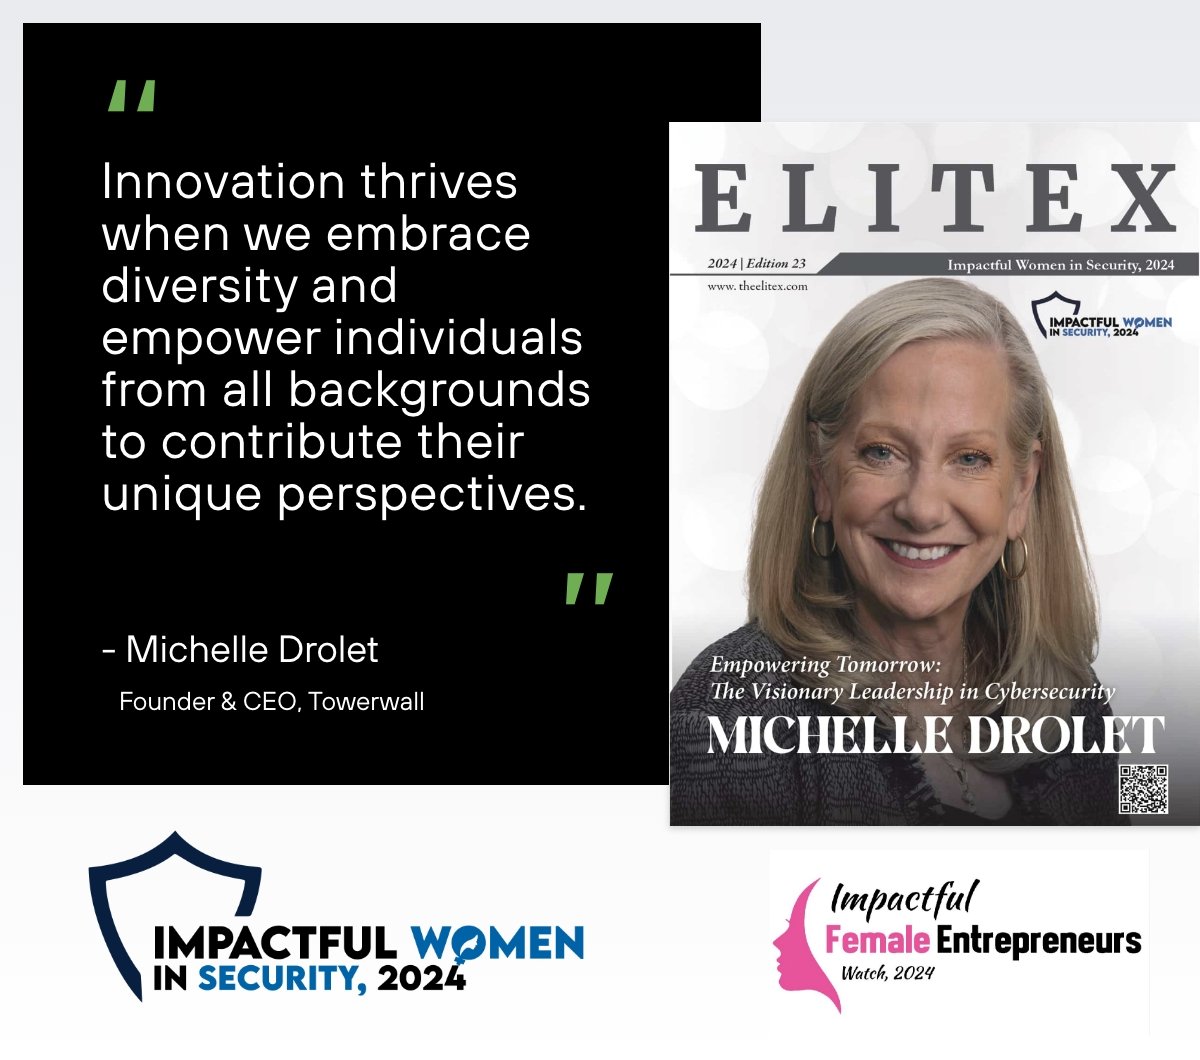 Congratulations to our Founder and CEO, Michelle Drolet, for being recognized by EliteX as an Impactful Women in Security in 2024.

Make sure to read the full article here: hubs.li/Q02sqjNq0 

#elitex  #WBENC #womenowned #digitalmagazine #womeninbusiness #womenleaders